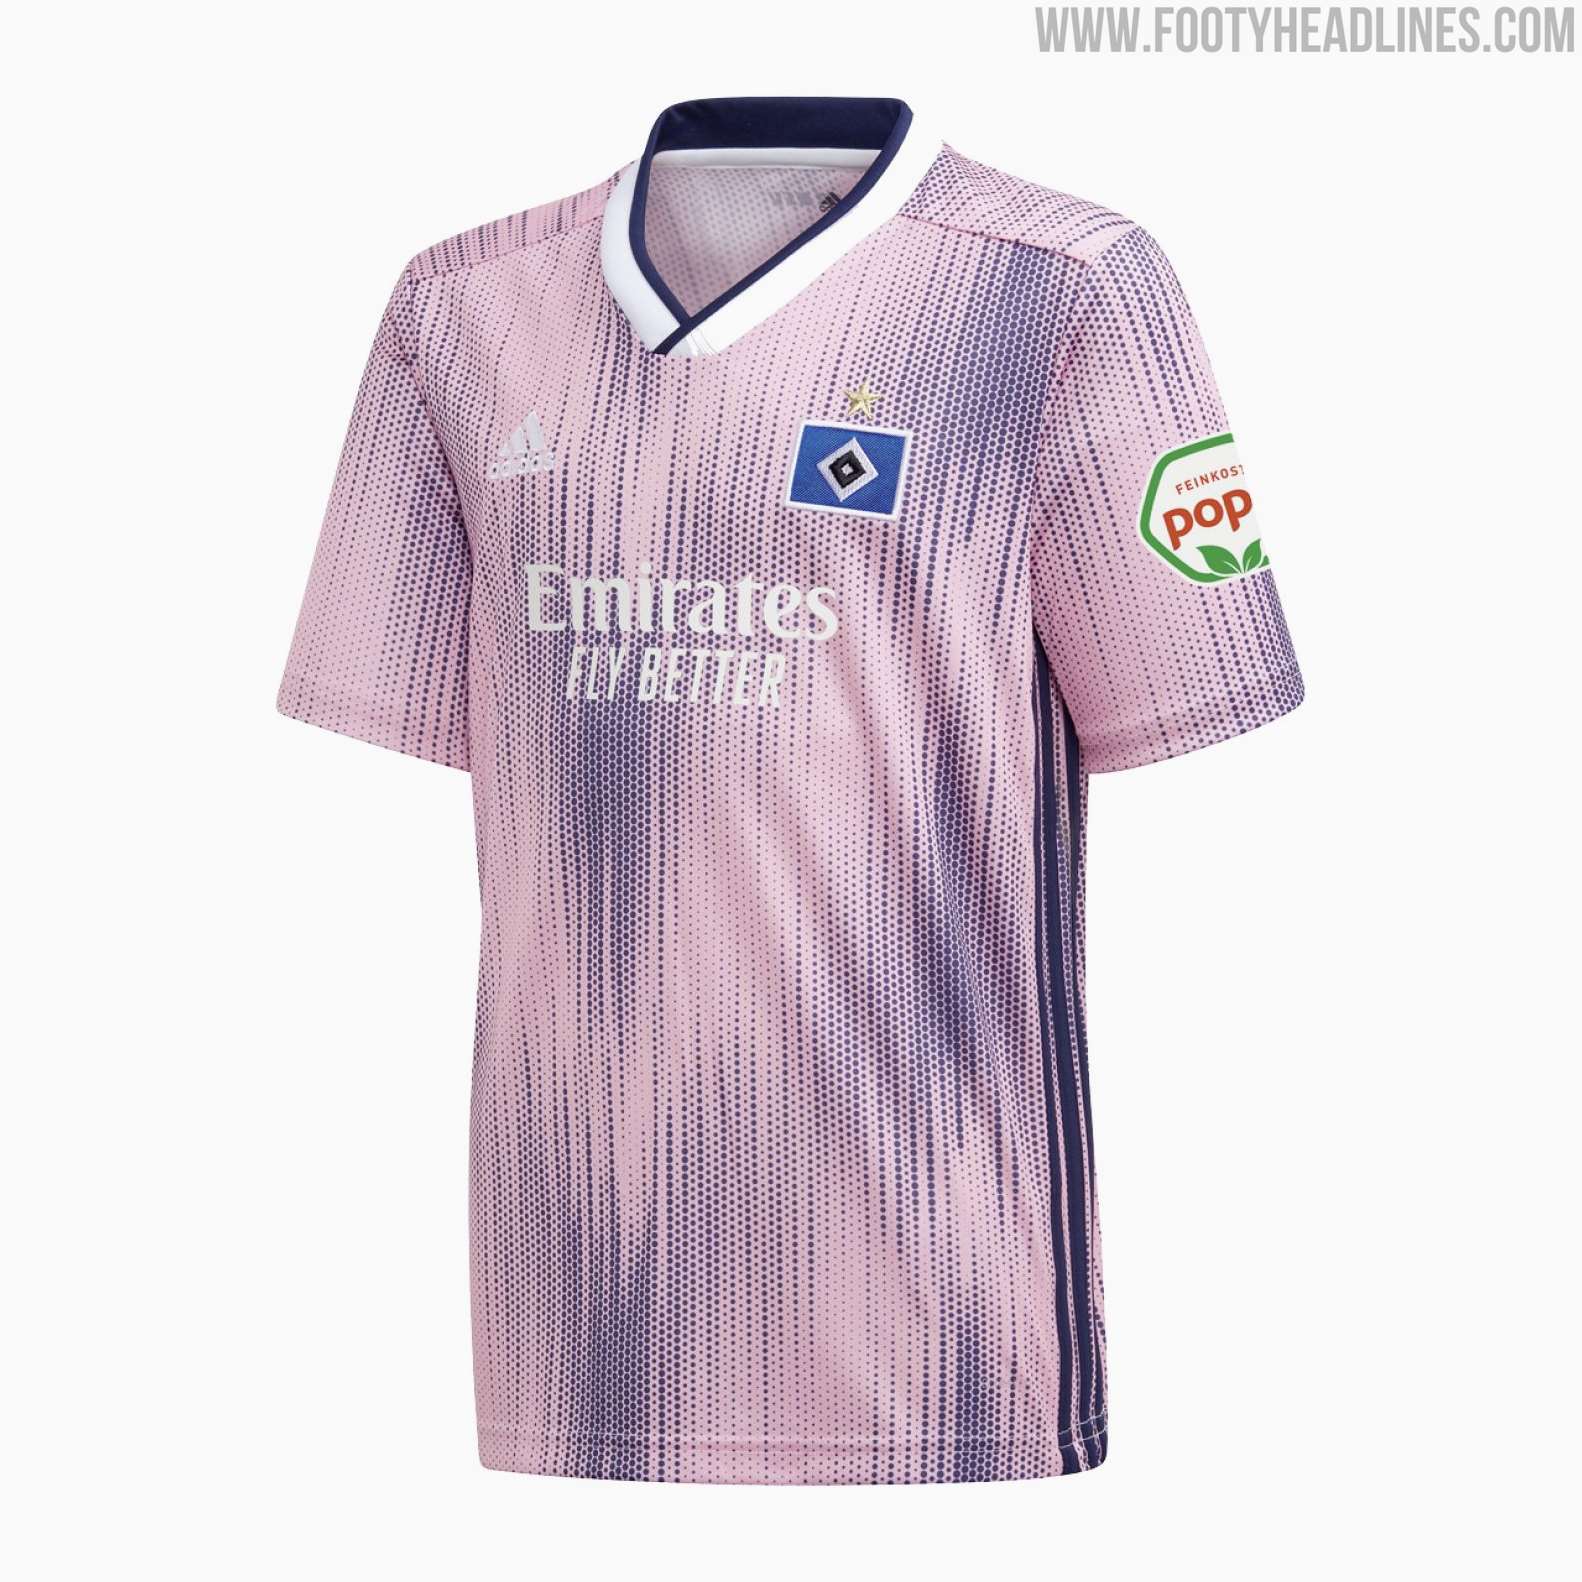 The Worst-Ever Kits of 31 Famous Clubs, As Voted by the Public - Footy  Headlines